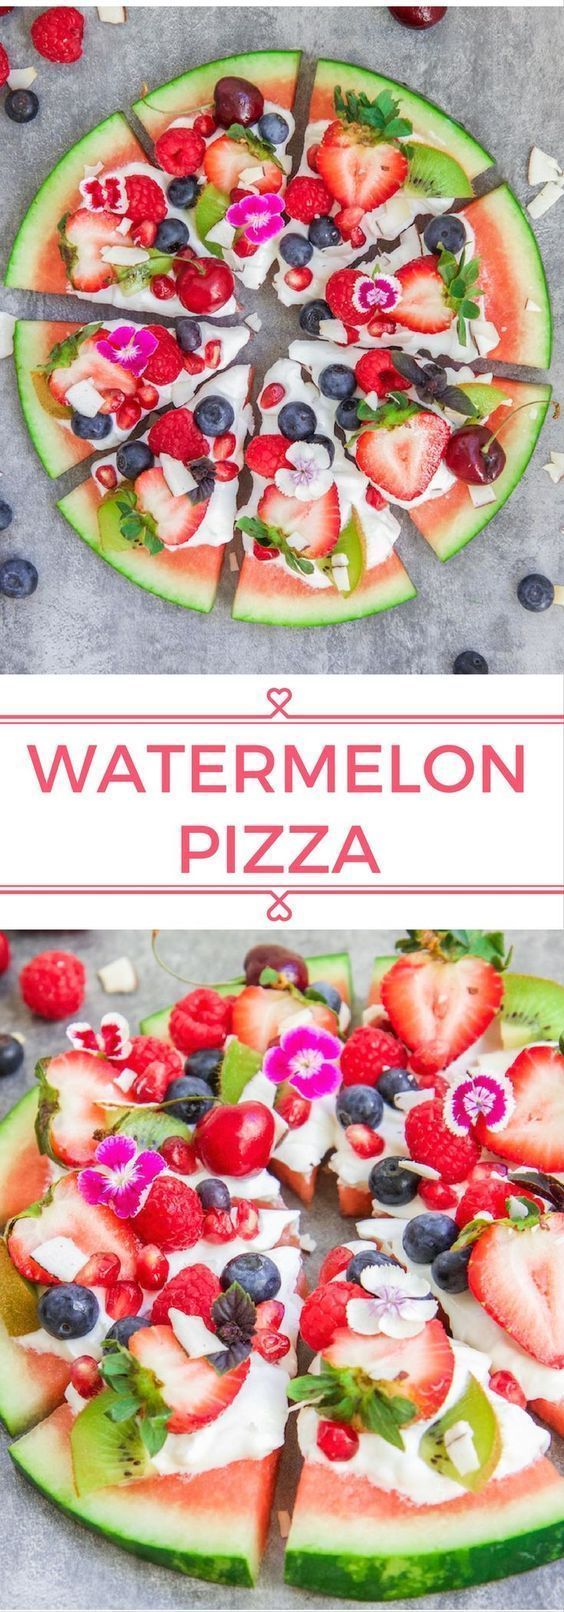 Watermelon Pizza -   16 healthy recipes Fruit cooking ideas